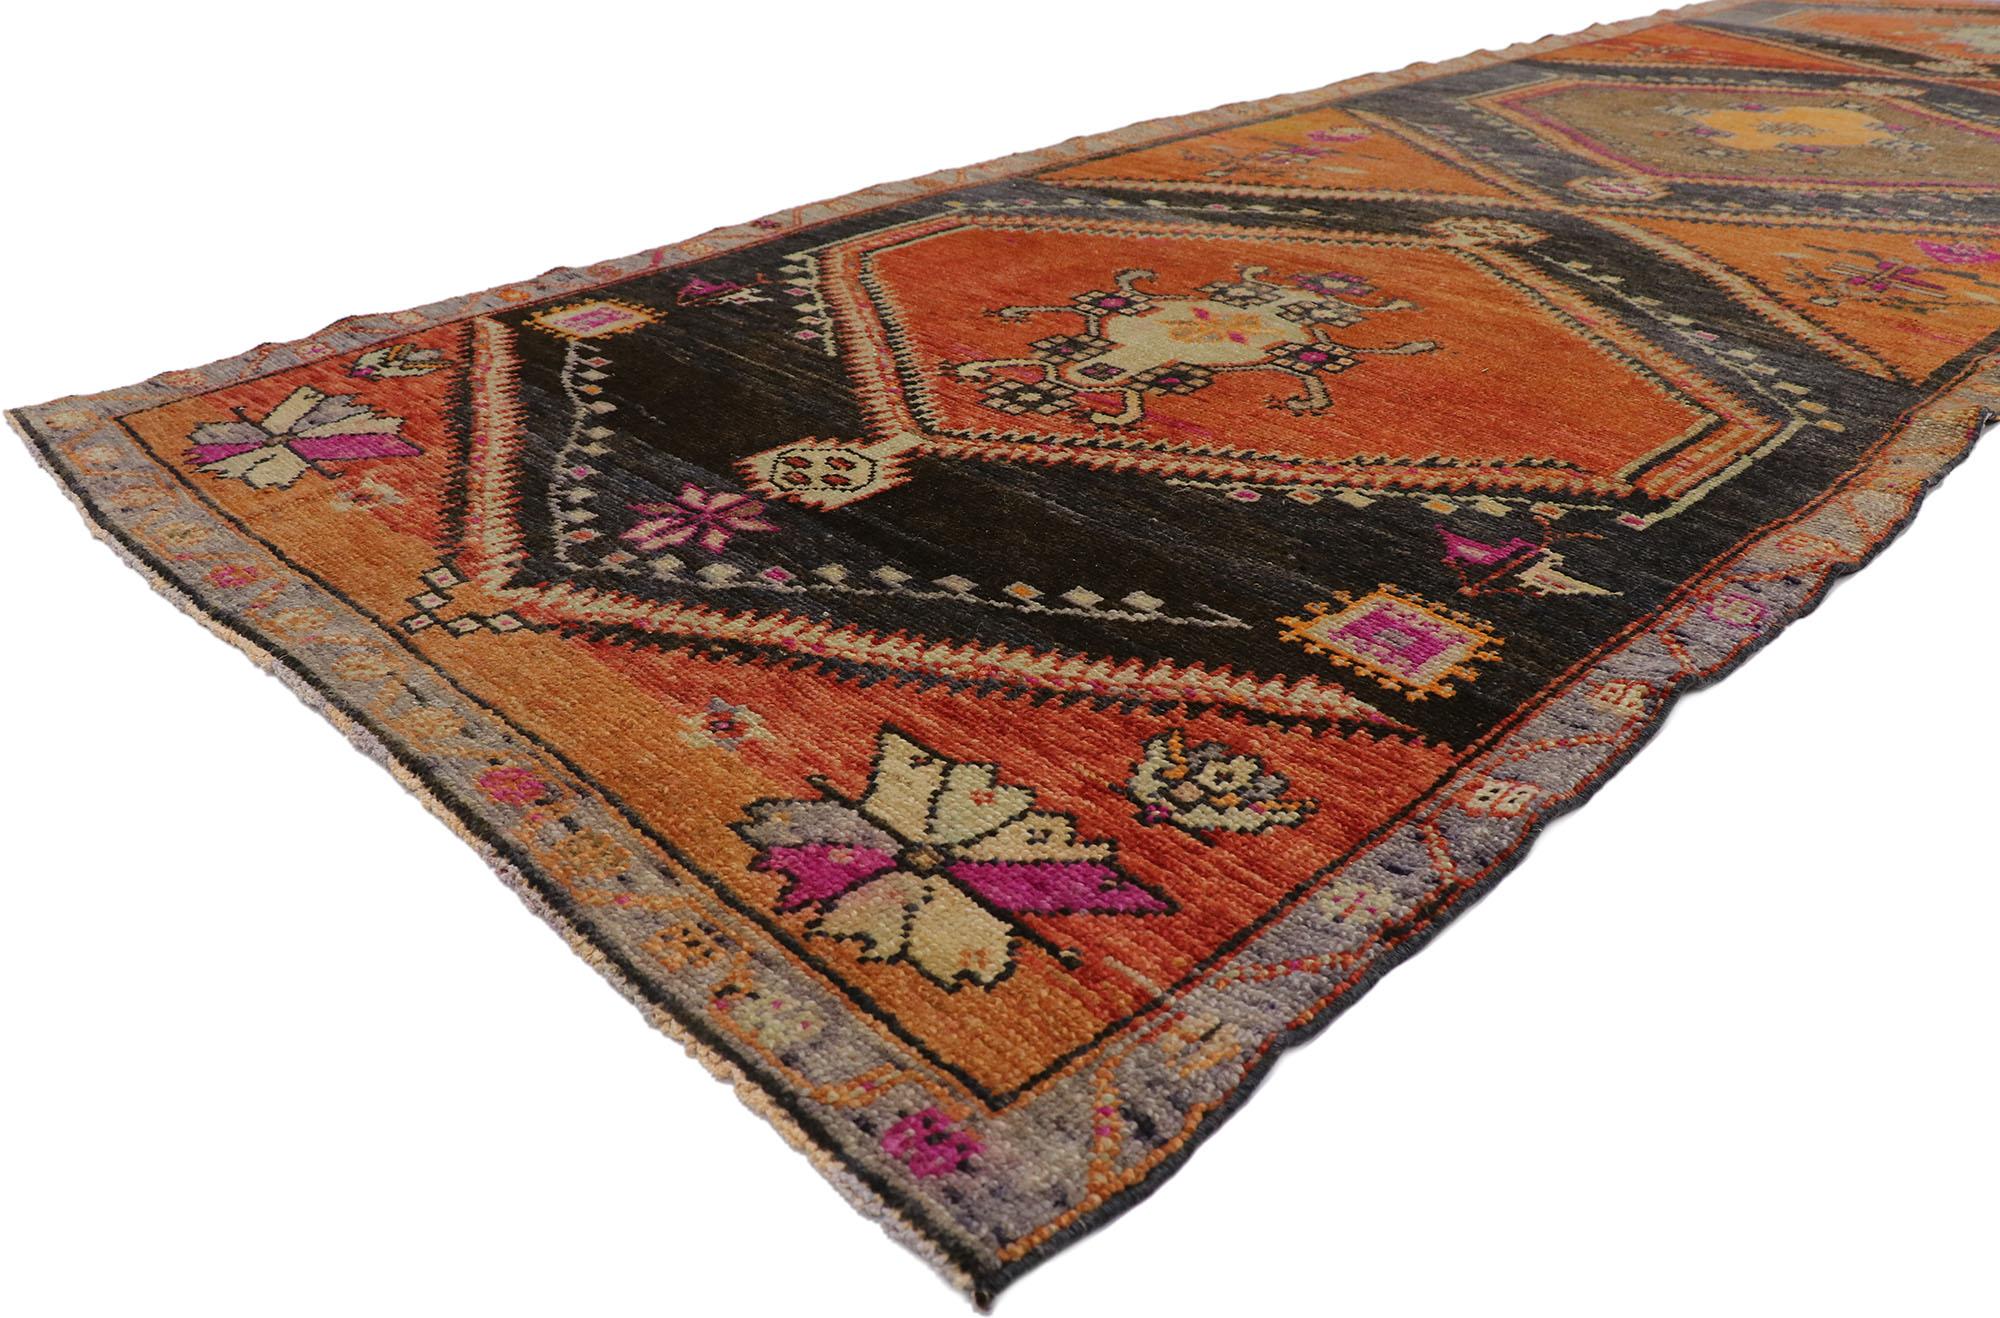 ?53581 Vintage Turkish Kars Gallery rug with Mid-Century Modern Style 04'08 x 15'02. ??Full of tiny details and a bold expressive design combined with vibrant colors and modern style, this hand-knotted wool vintage Turkish Kars gallery rug is a